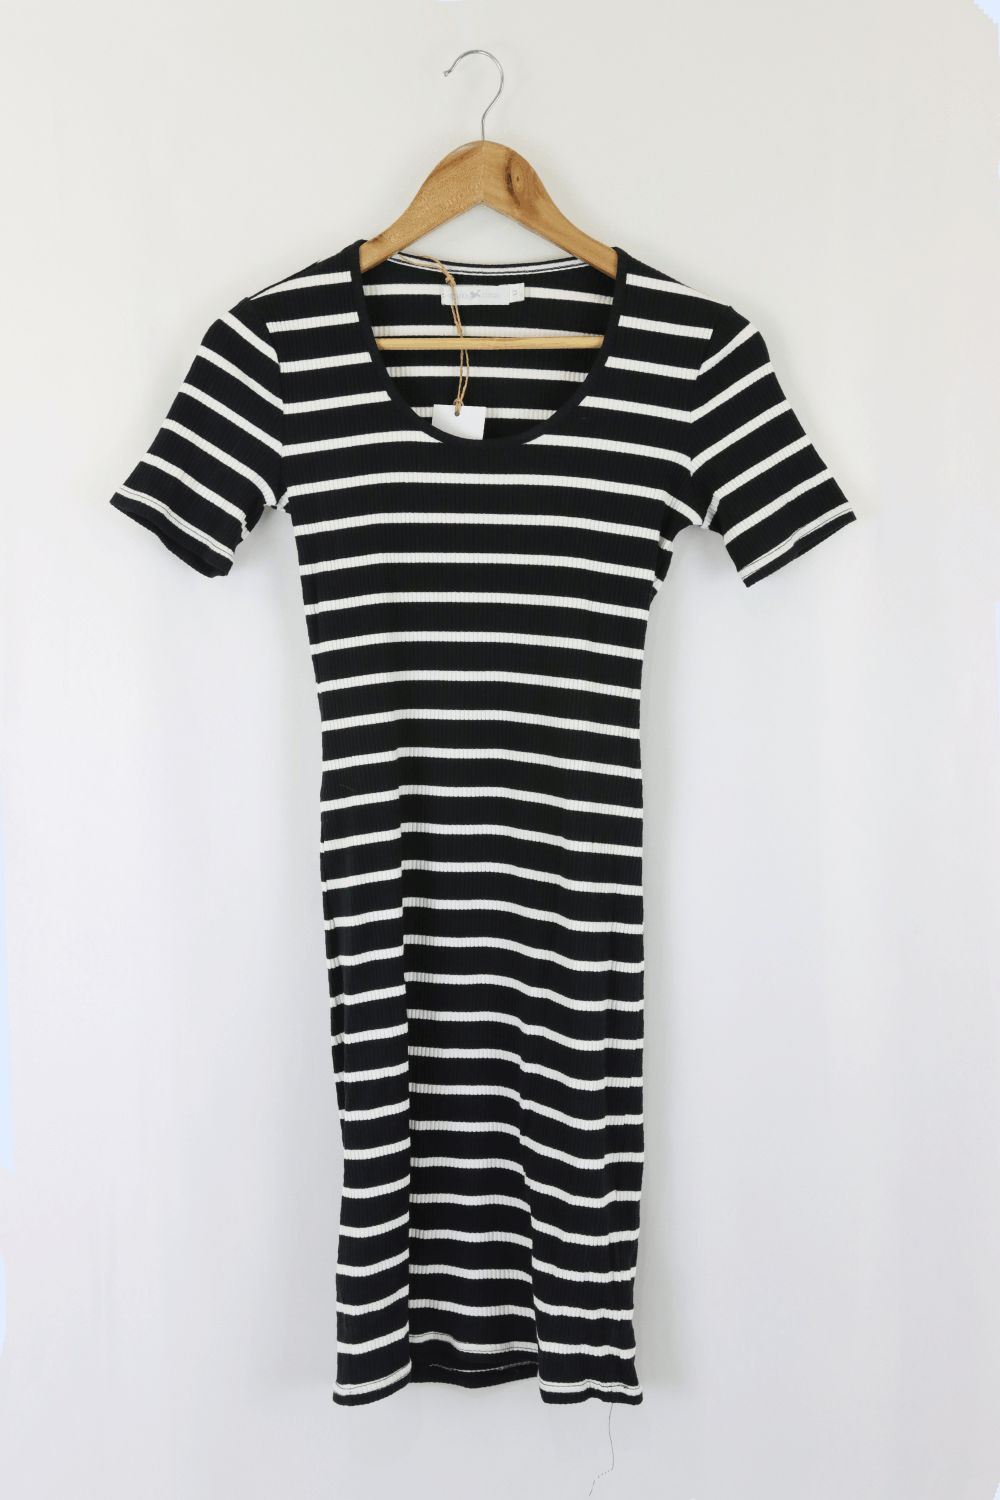 Quirky Circus Black And White Dress 12